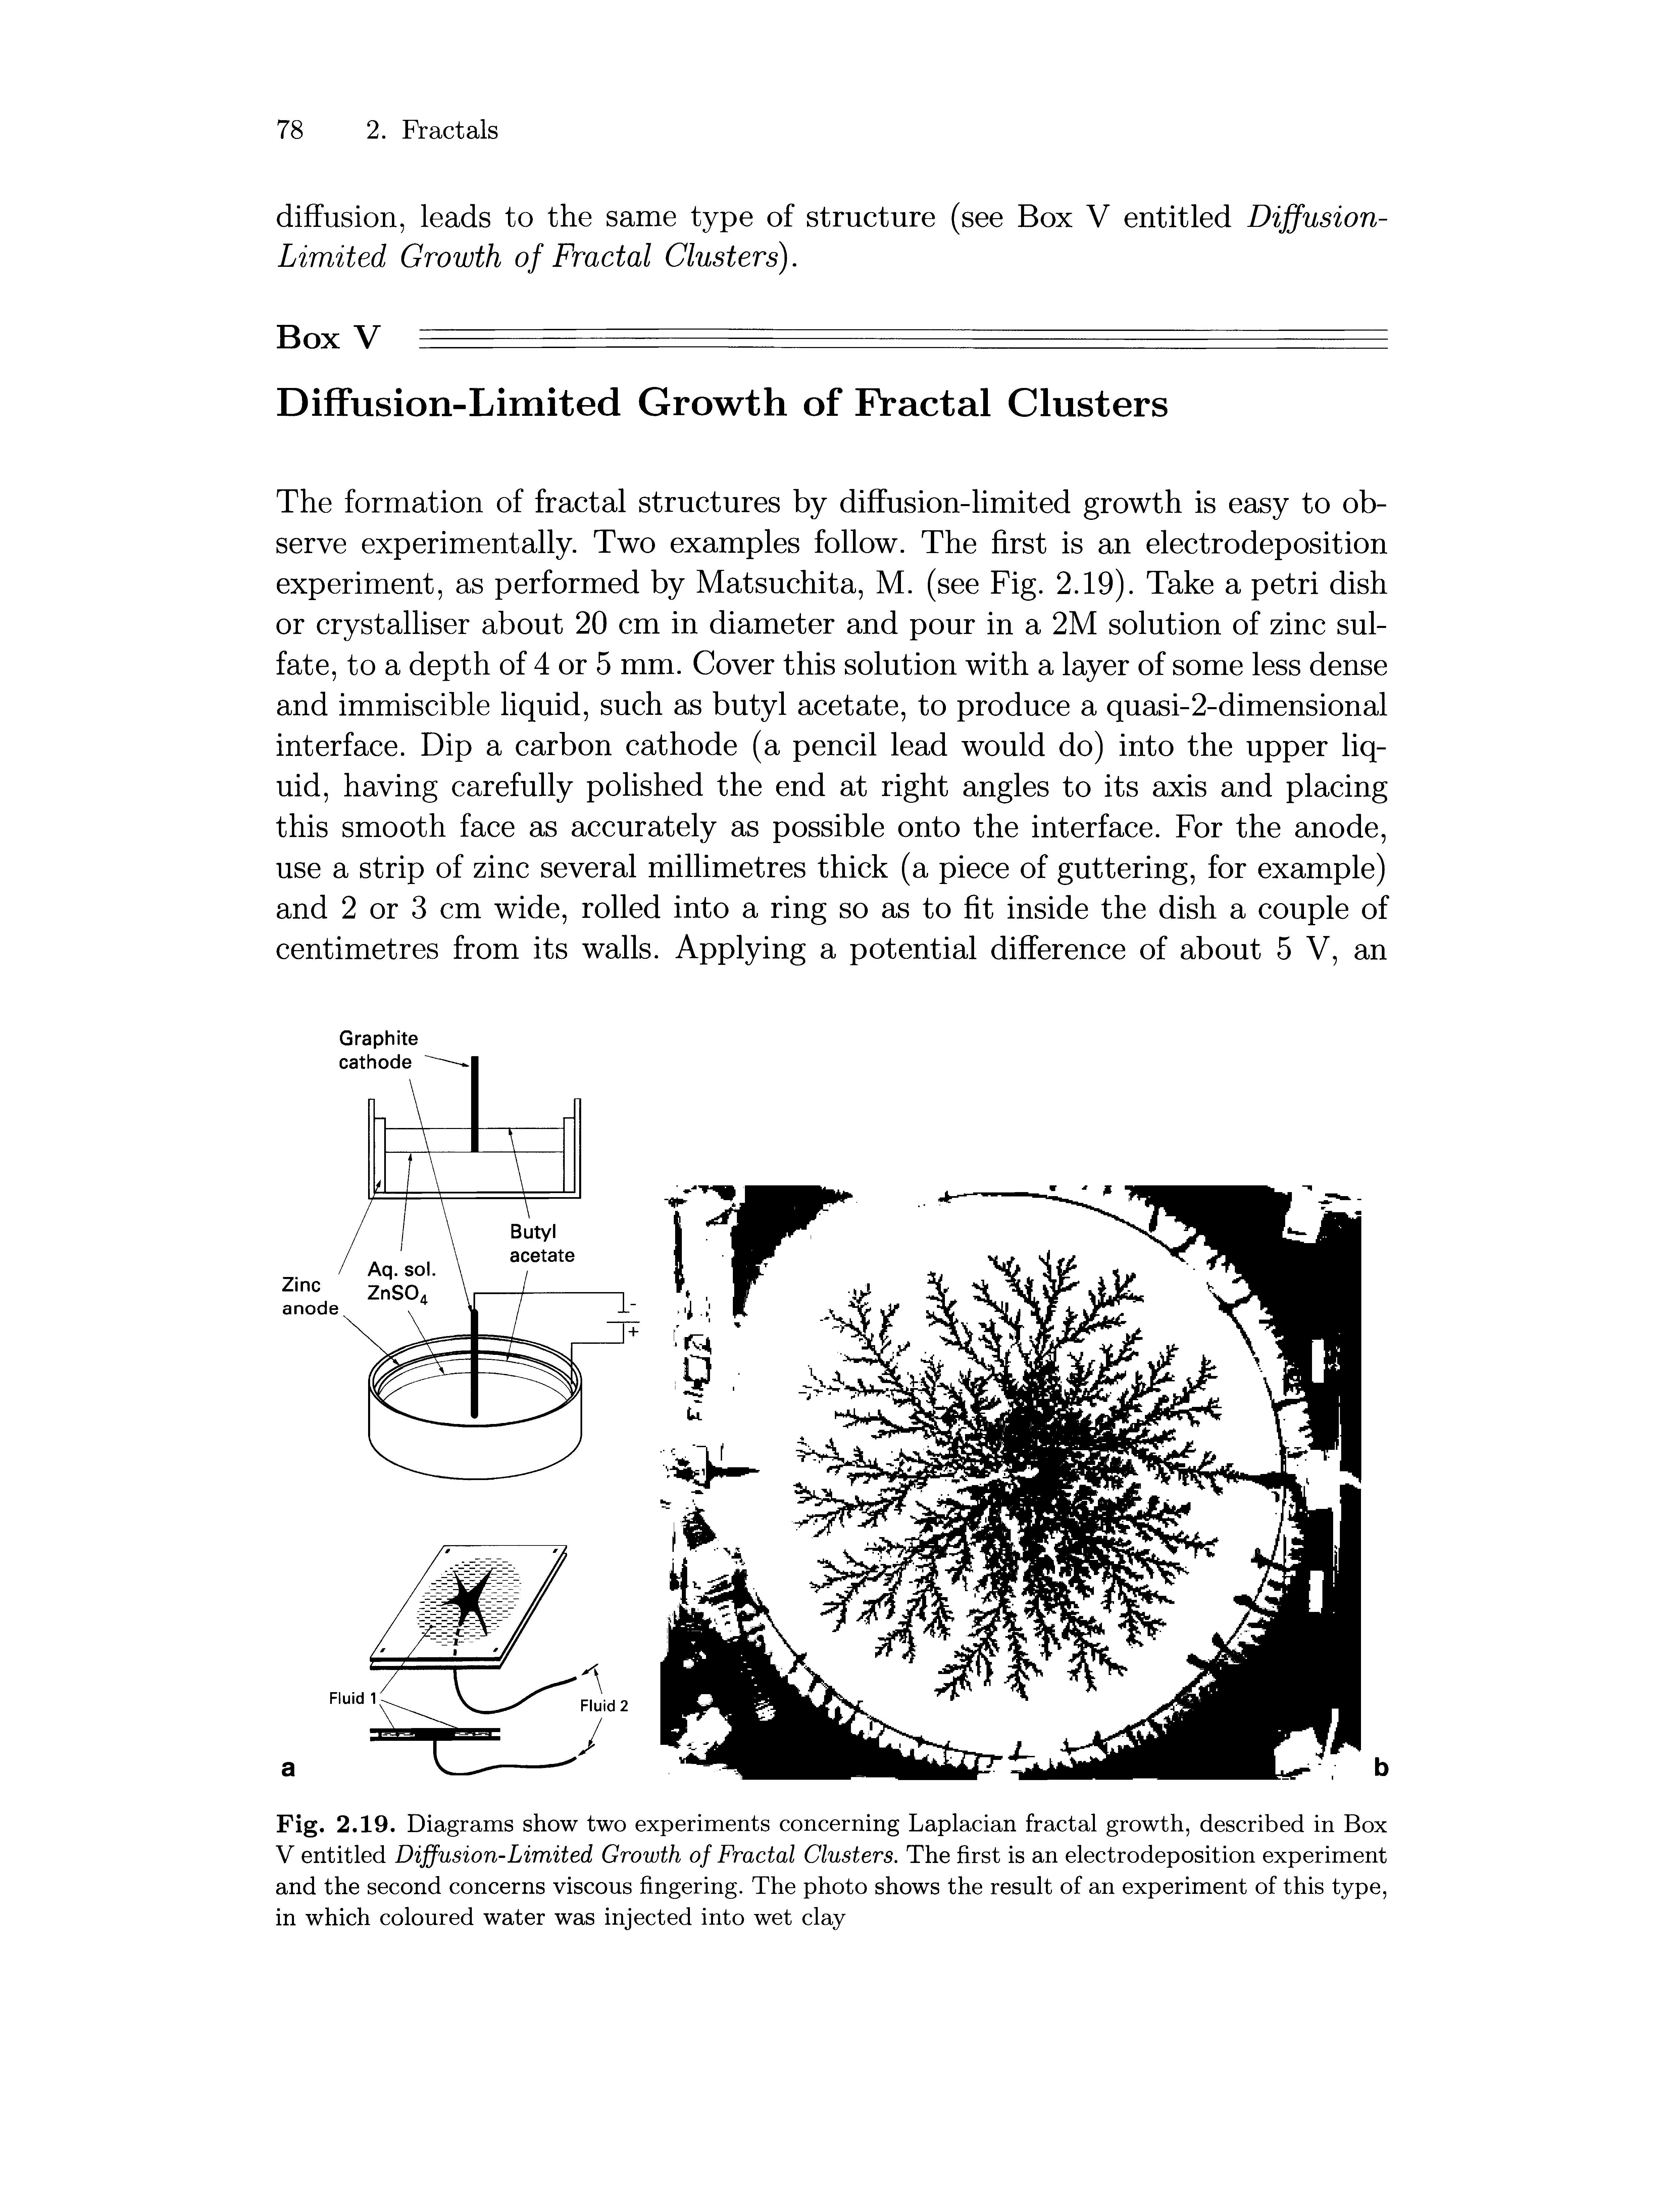 Fig. 2.19. Diagrams show two experiments concerning Laplacian fractal growth, described in Box V entitled Diffusion-Limited Growth of Fractal Clusters. The first is an electrodeposition experiment and the second concerns viscous fingering. The photo shows the result of an experiment of this type, in which coloured water was injected into wet clay...